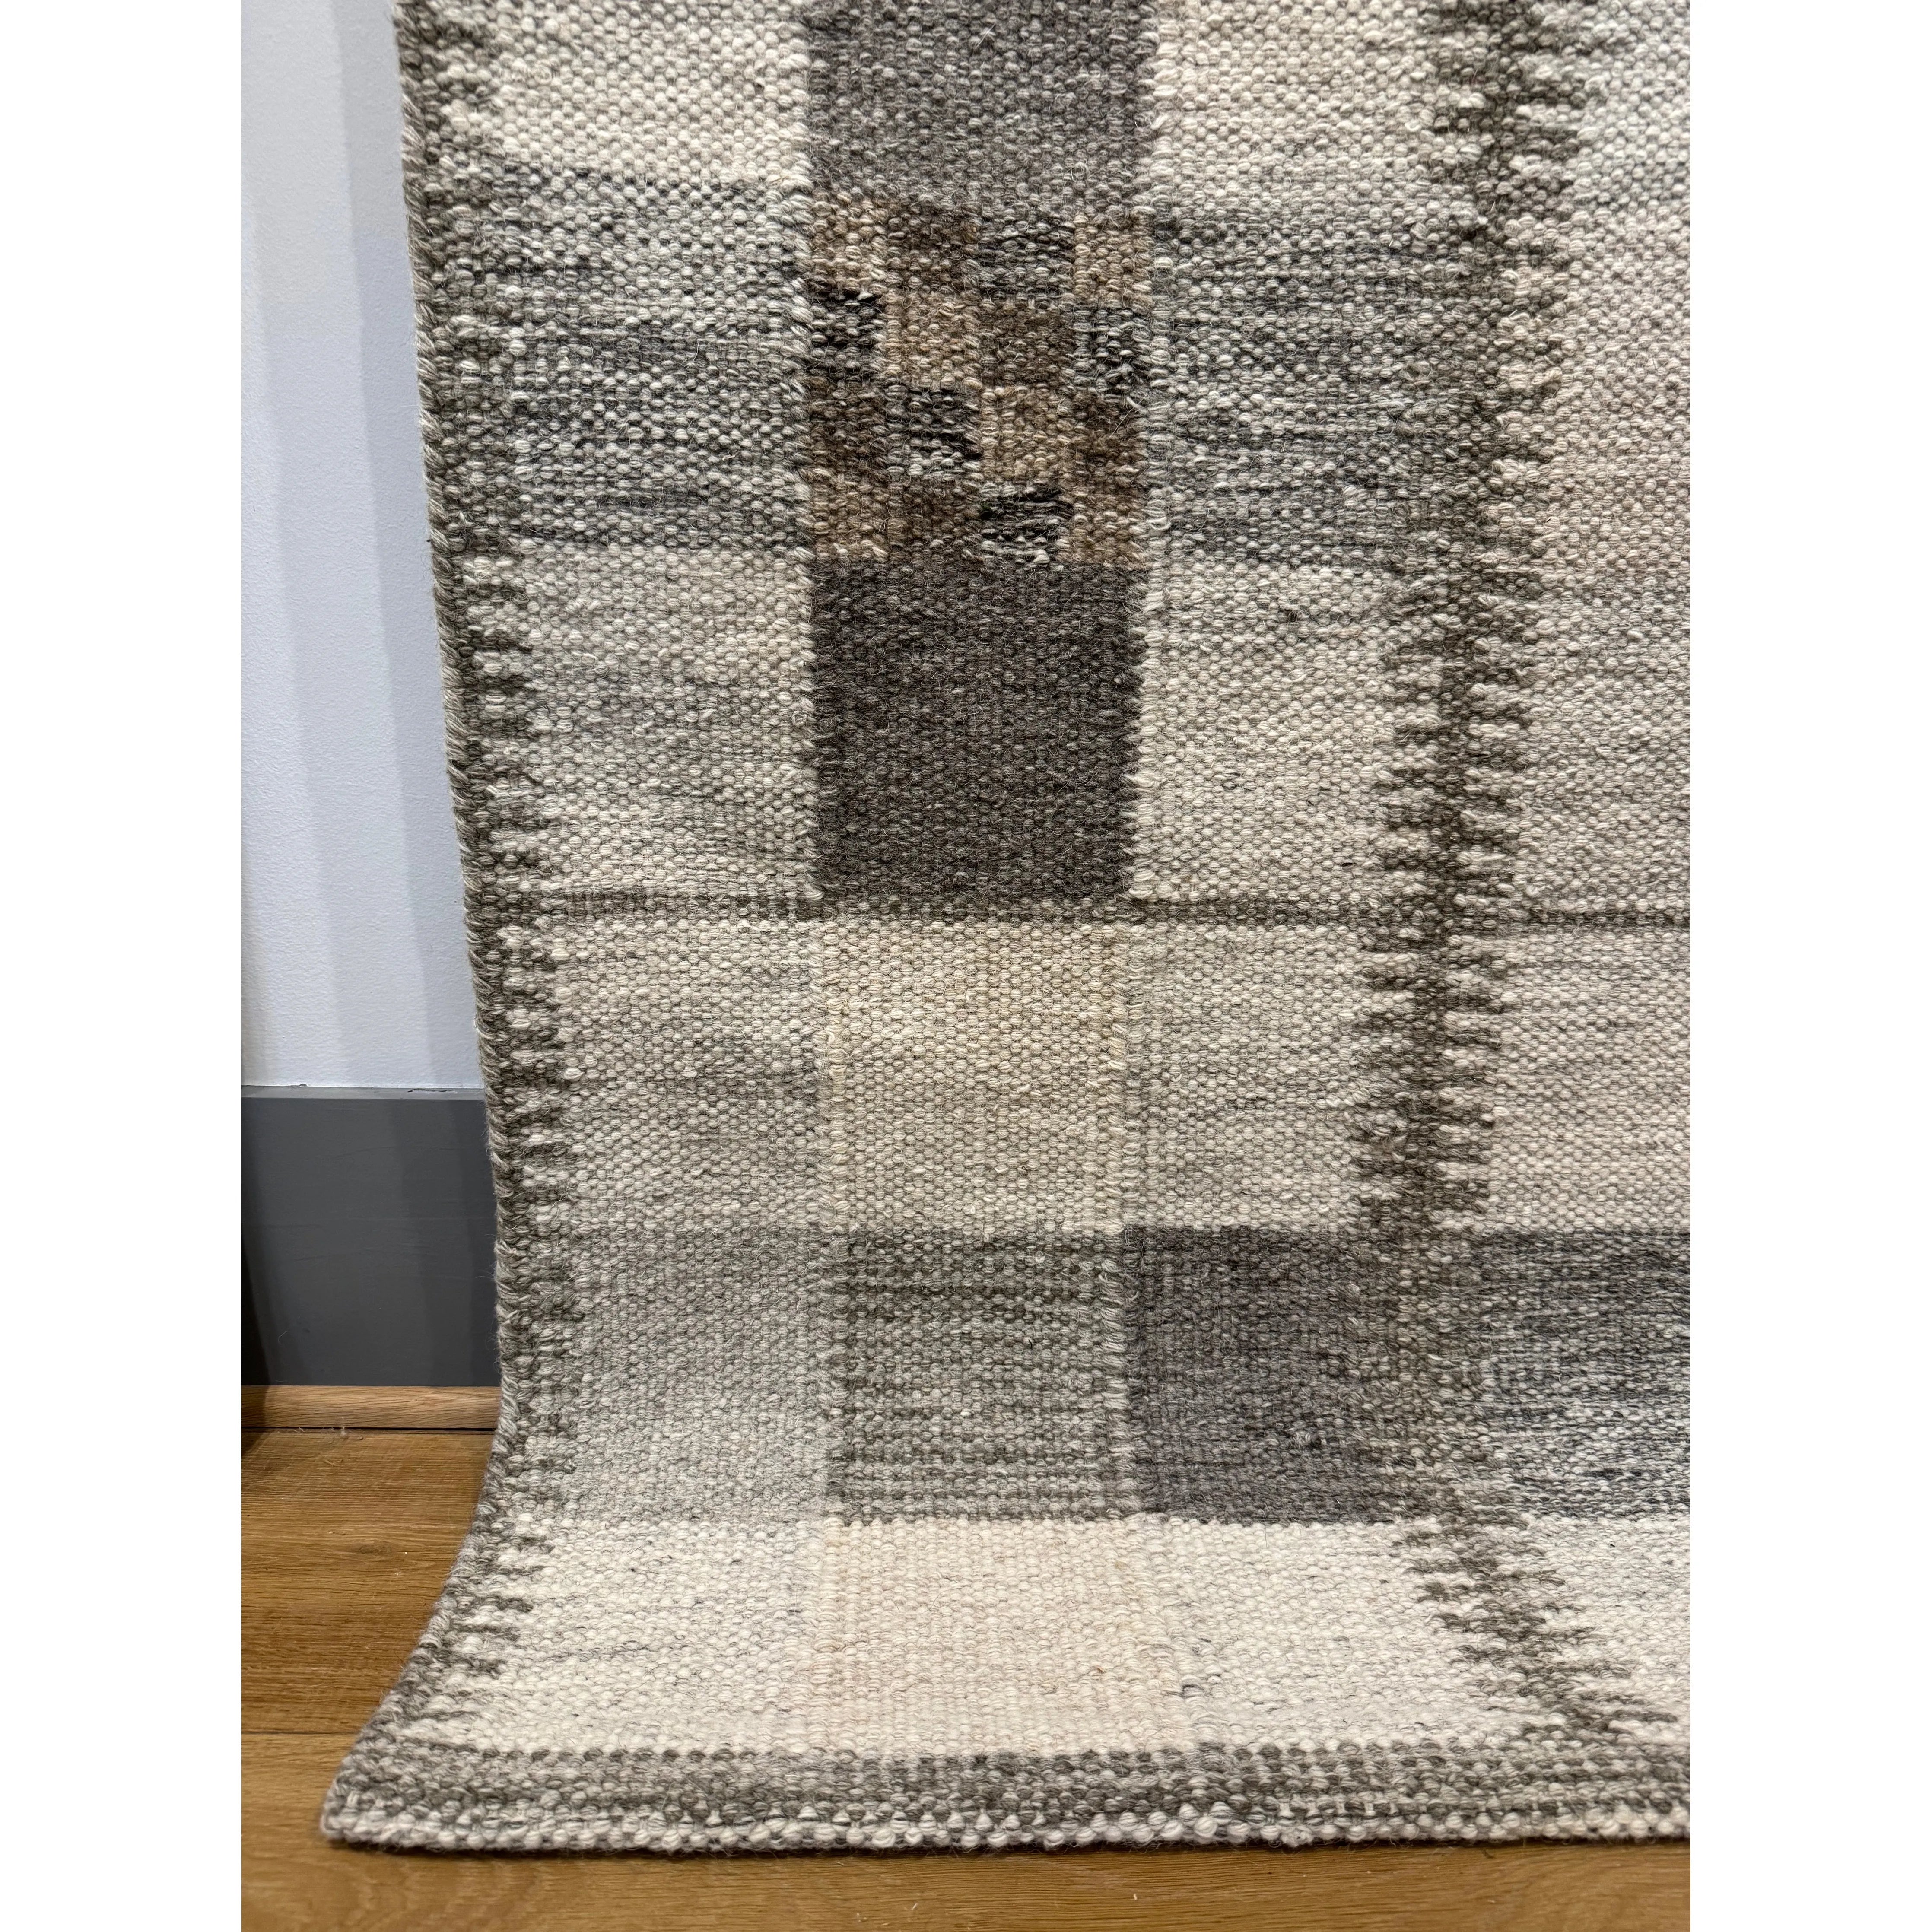 This new flat weave reinvents vintage Scandinavian Kilim in ways that both honor the Swedish minimalist aesthetic and modernize its construction.